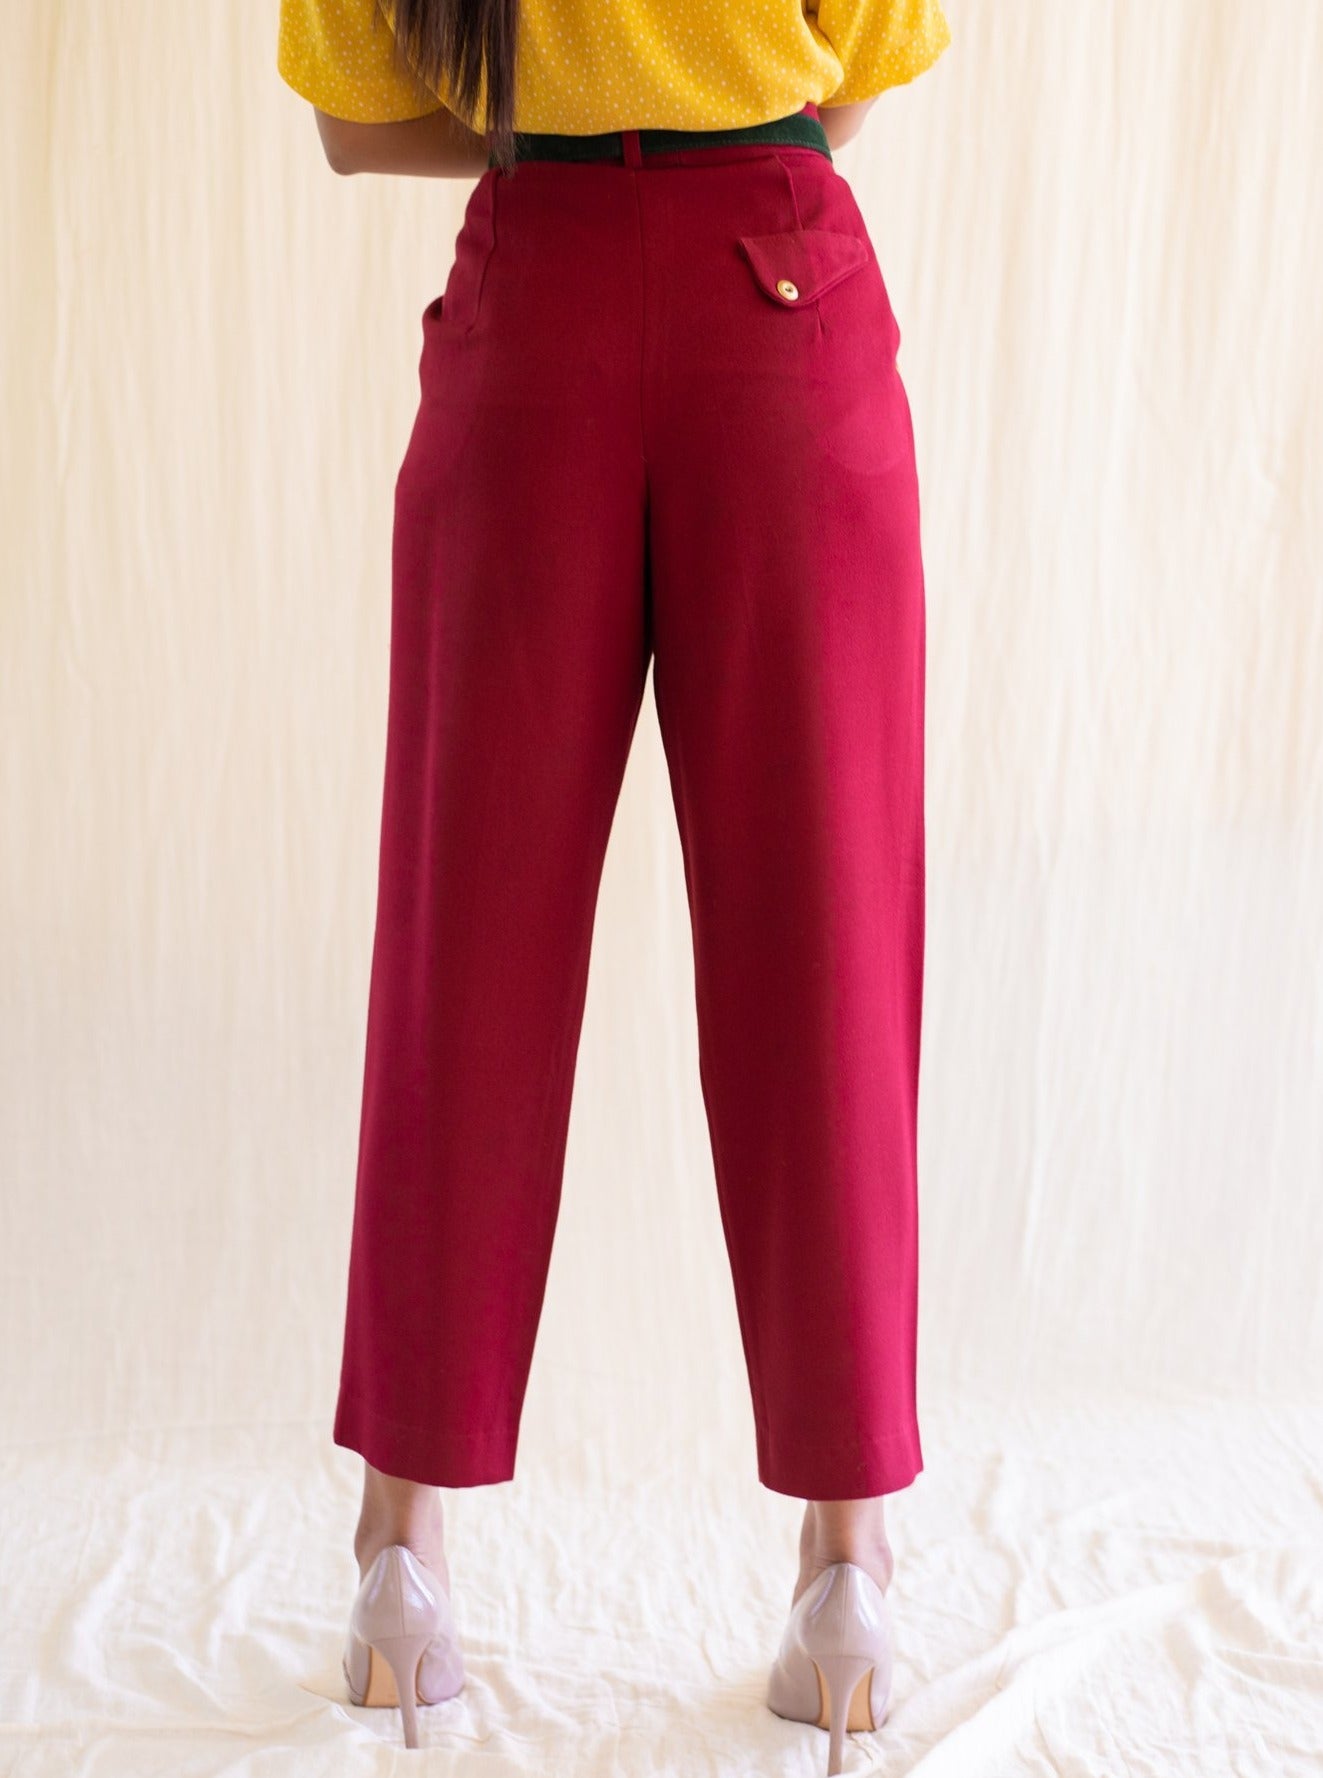 SUGARCREAM_VINTAGE_HIGH_WAIST_RED_COTTON_TROUSERS_2